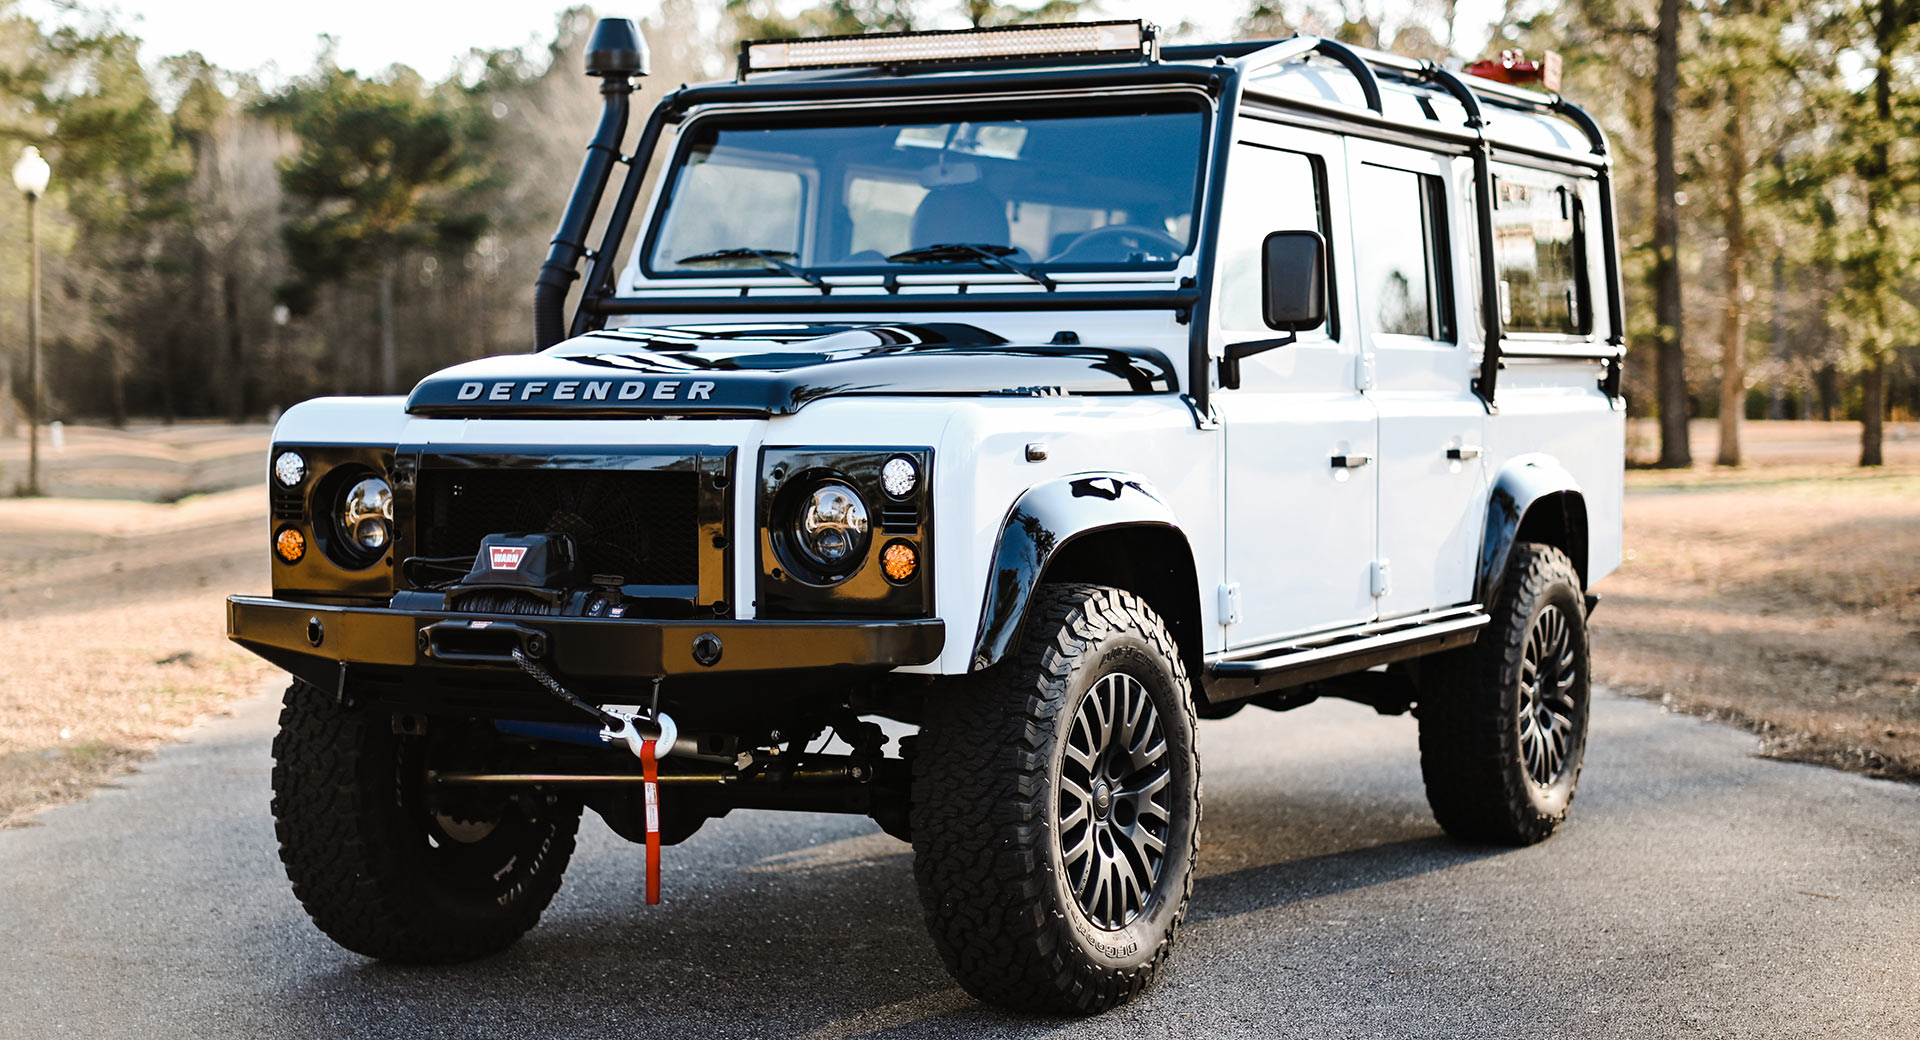 Osprey's Classic Land Rover Defender Restomod Costs Nearly As Much As